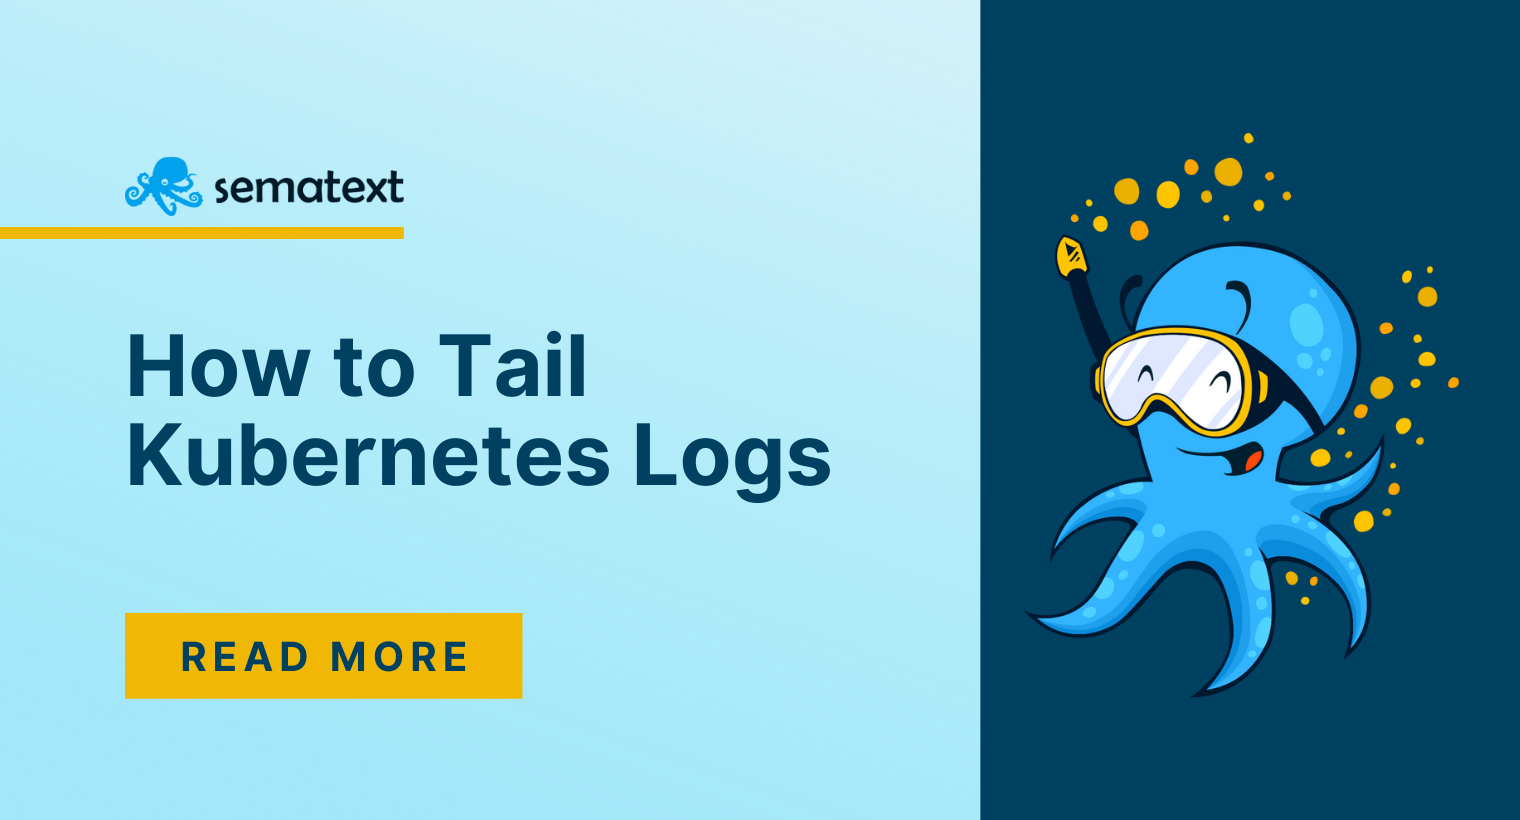 How to Tail Kubernetes Logs: Using the Kubectl Command to See Pod, Container, and Deployment Logs